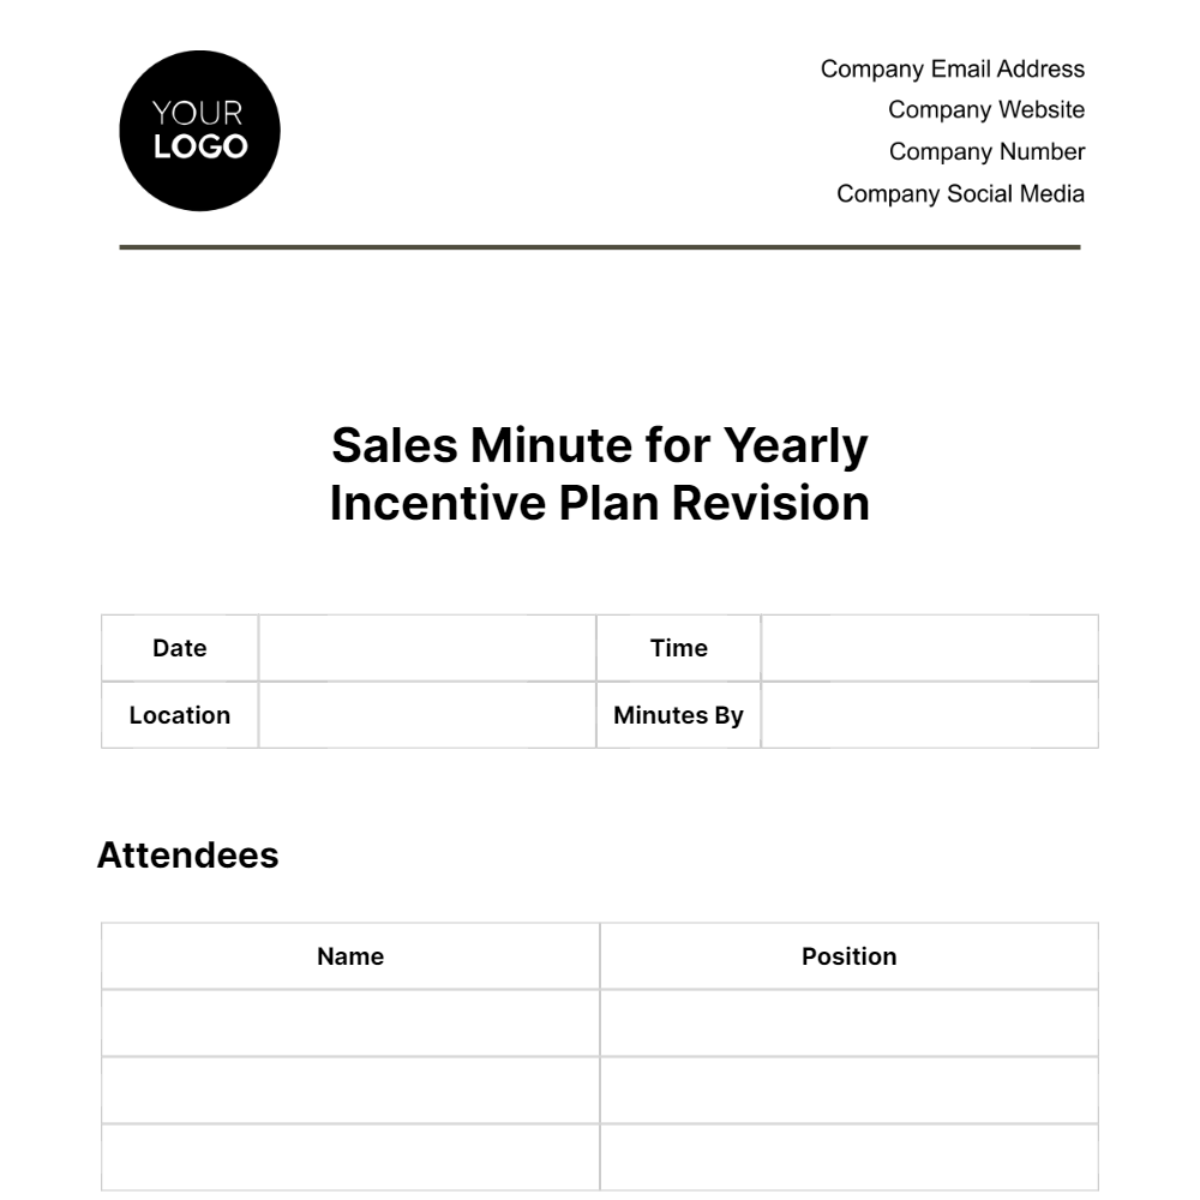 Sales Minute for Yearly Incentive Plan Revision Template